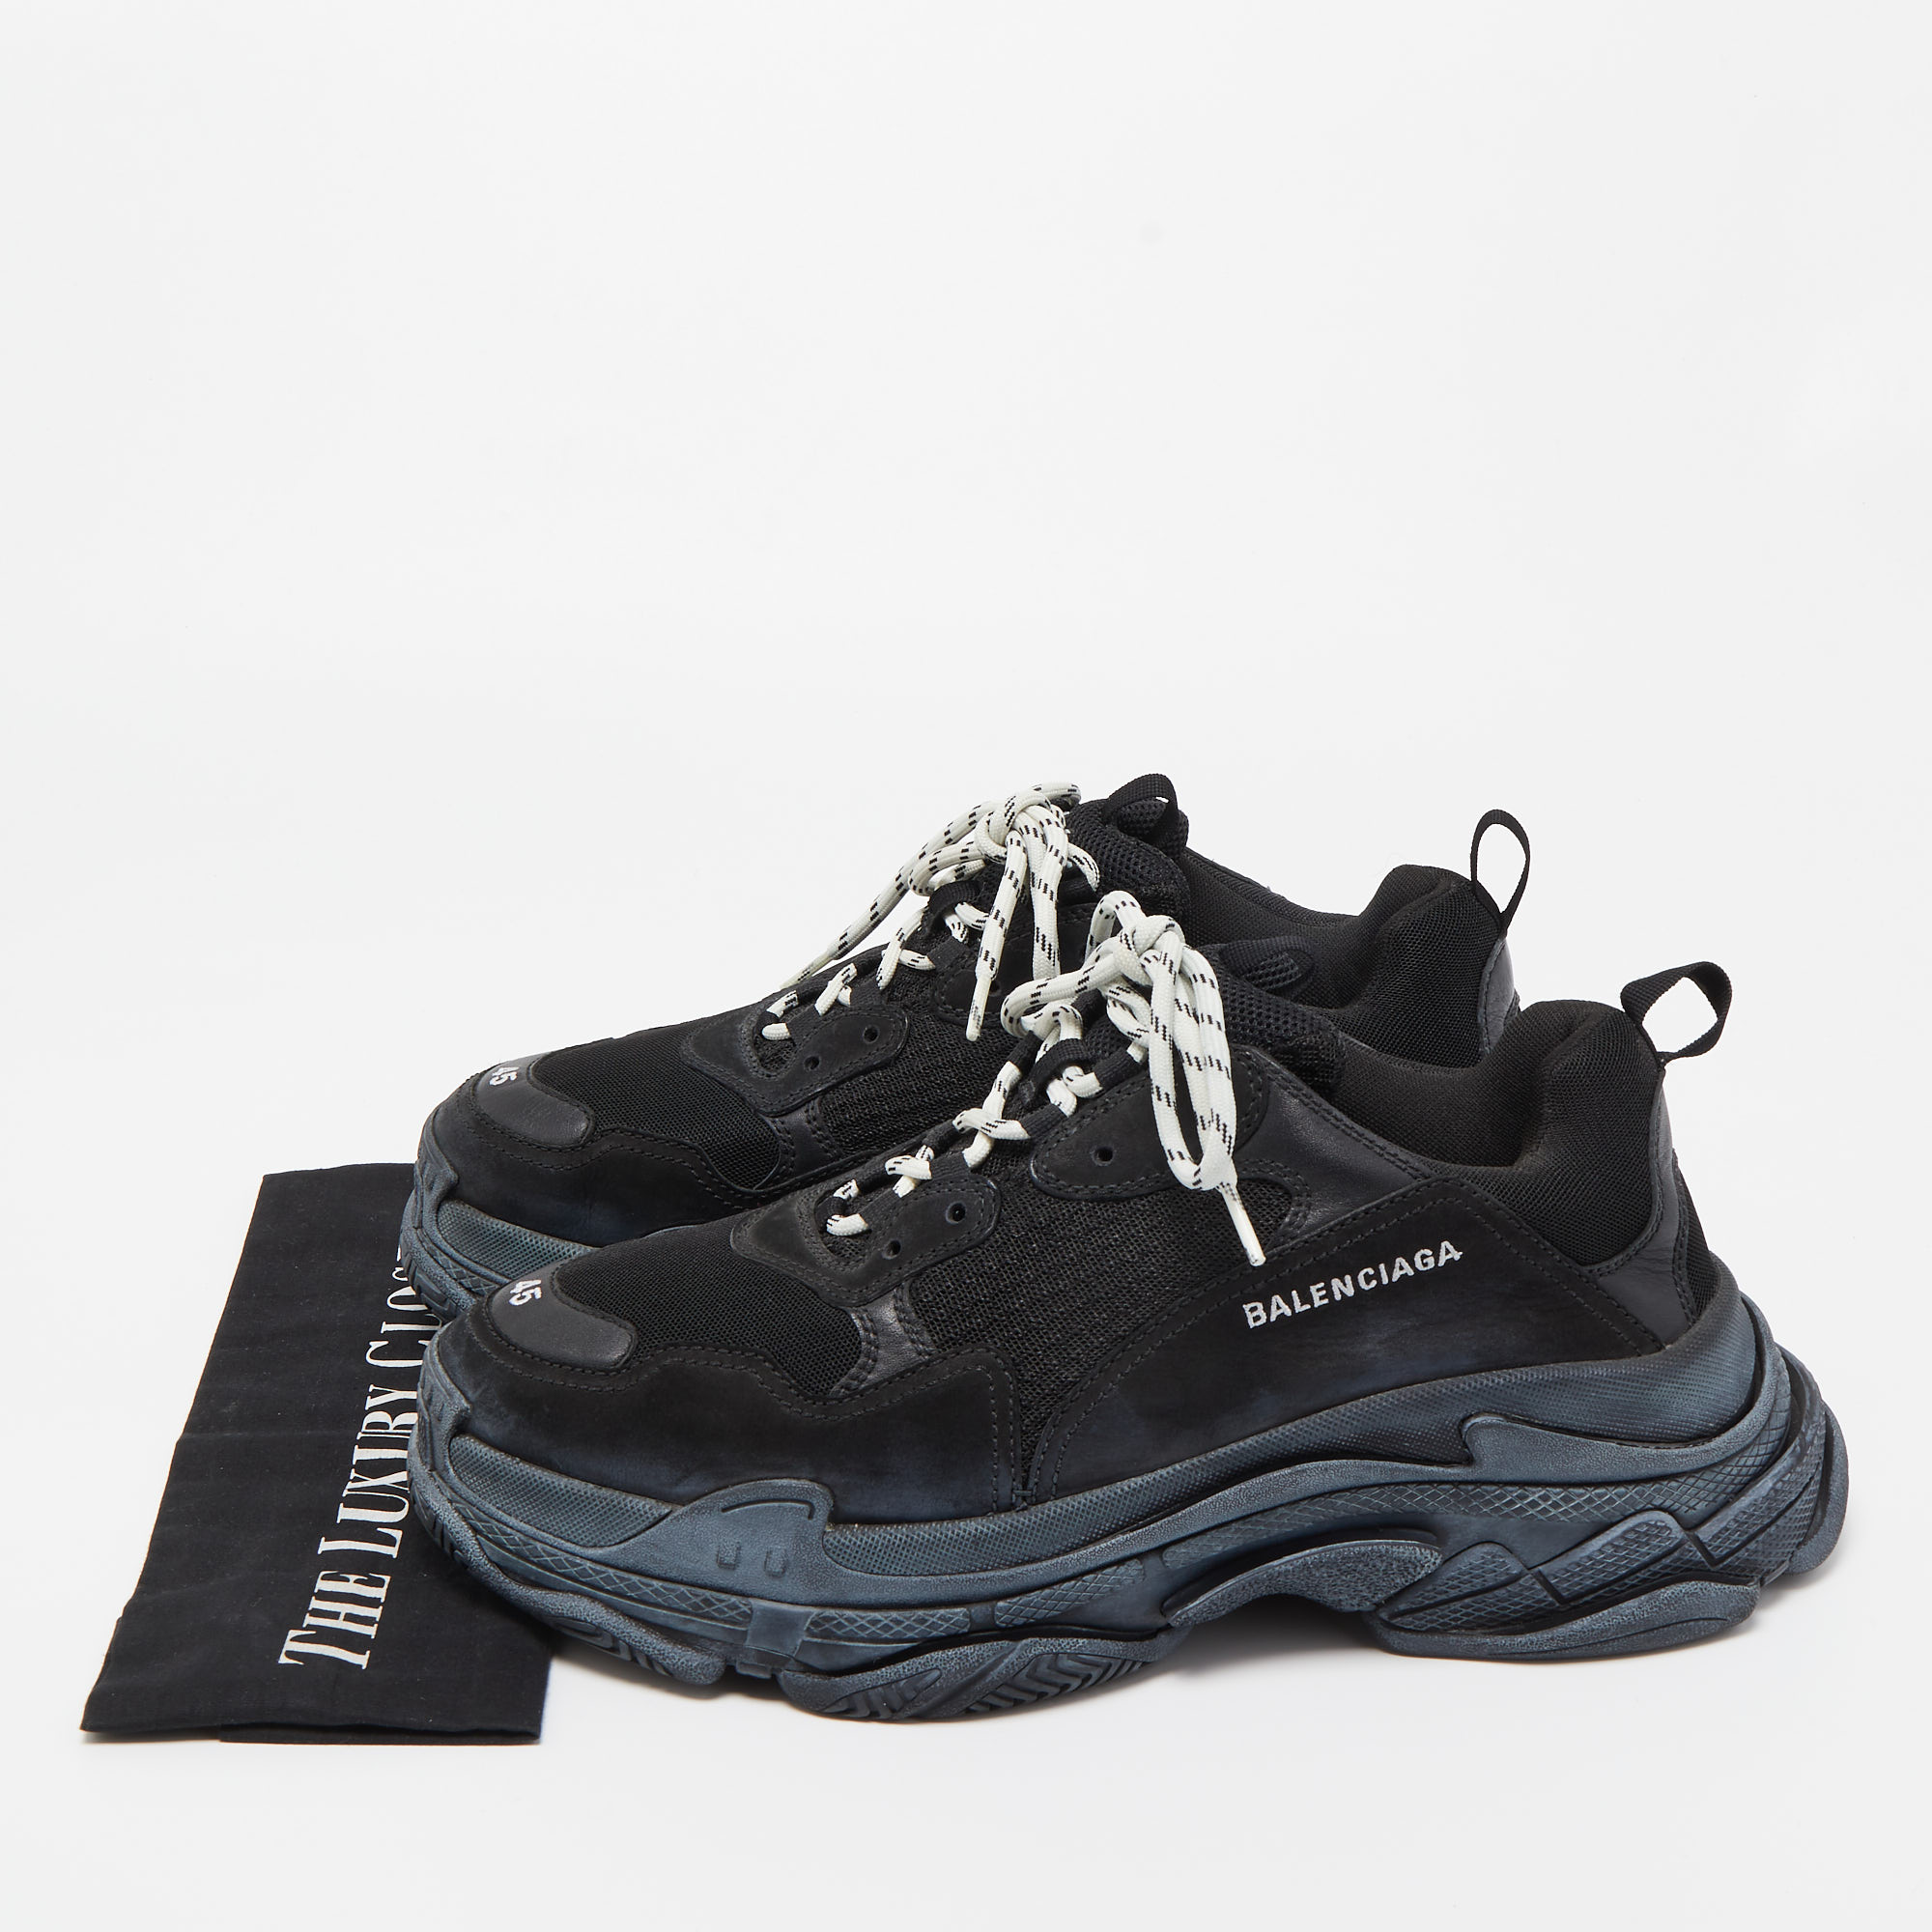 Balenciaga Black Nubuck Leather And Mesh Triple S Low Top Sneakers Size 45